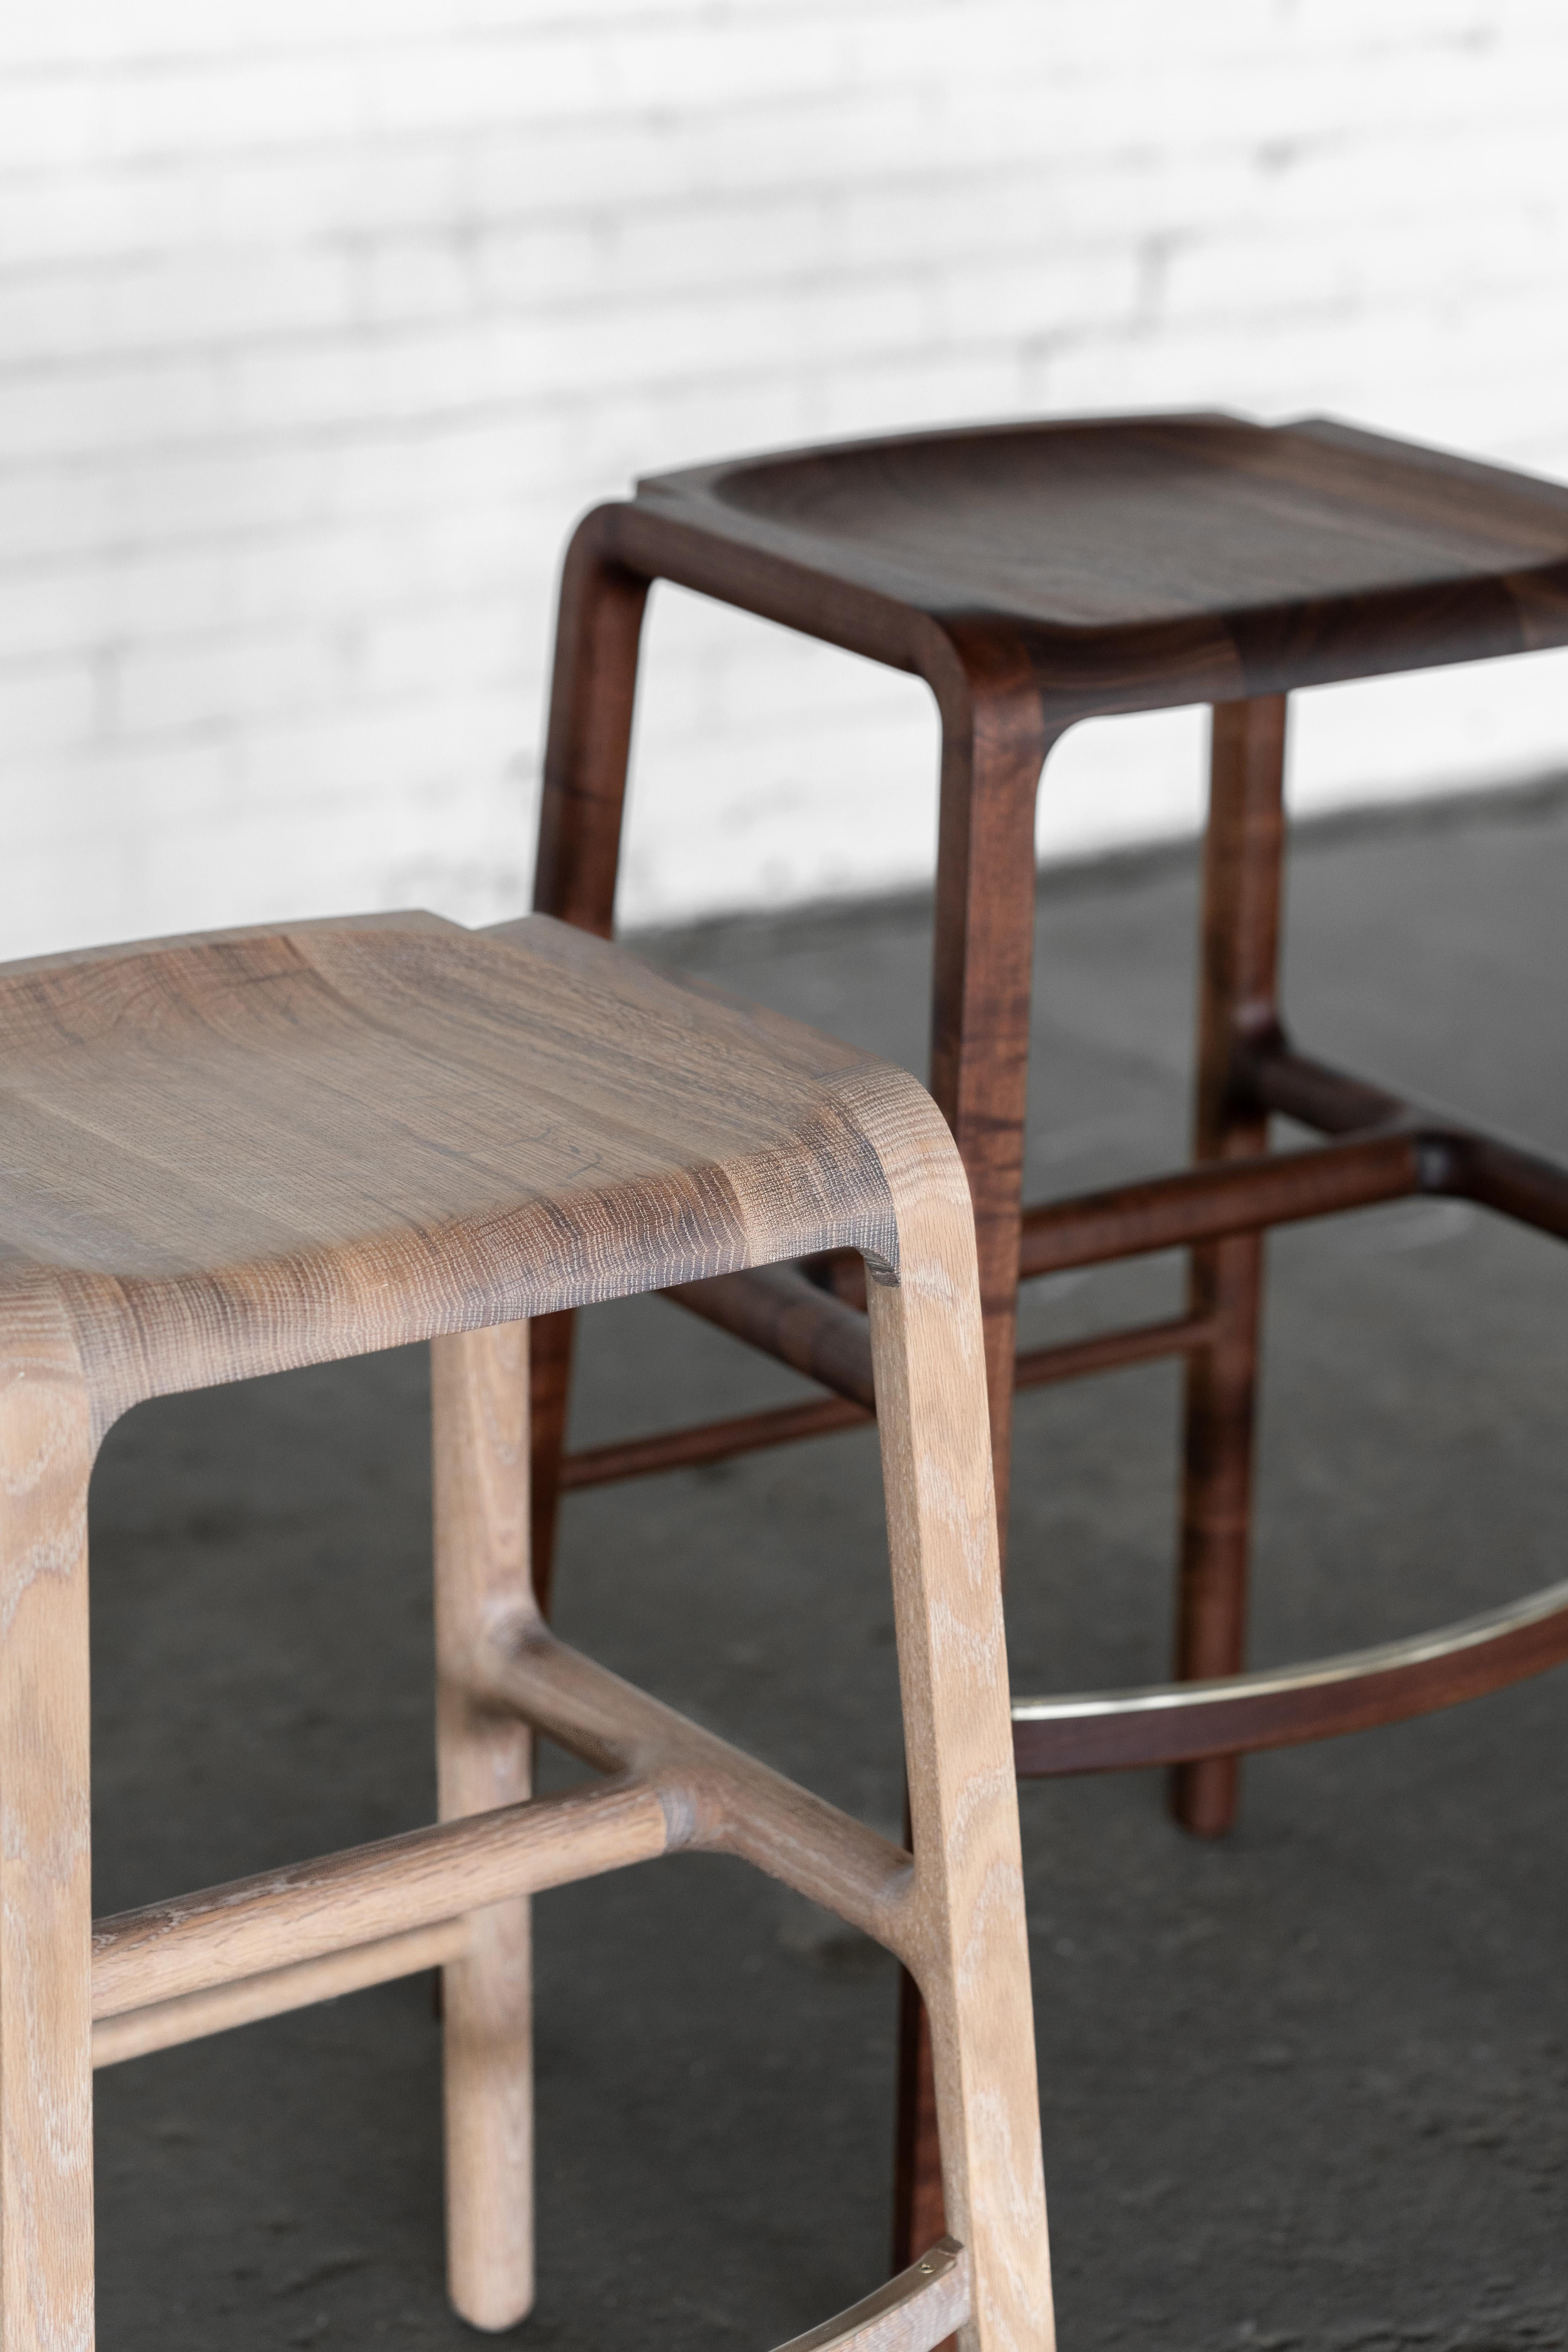 This piece is an all-wood stool with subtle brass detailing.  Our focus was to create a unique modern shape that shows off the natural hardwood details while echoing the timeless charm of our Estrada and Delano chairs. We placed a lot of emphasis on